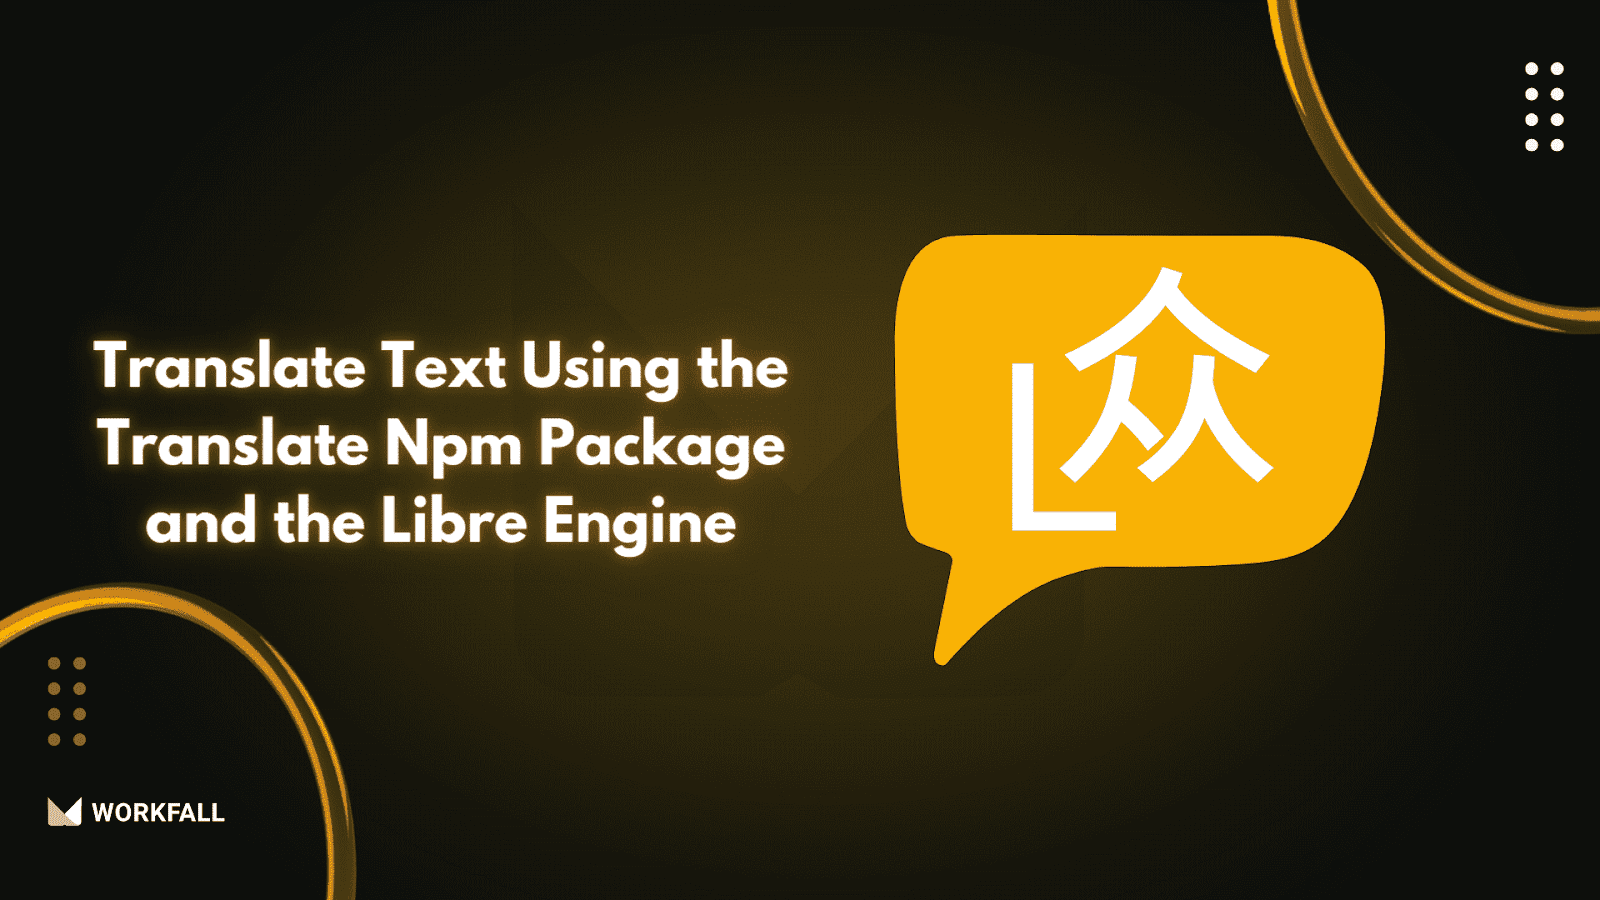 Translate Text Using the Translate Npm Package and the Libre Engine